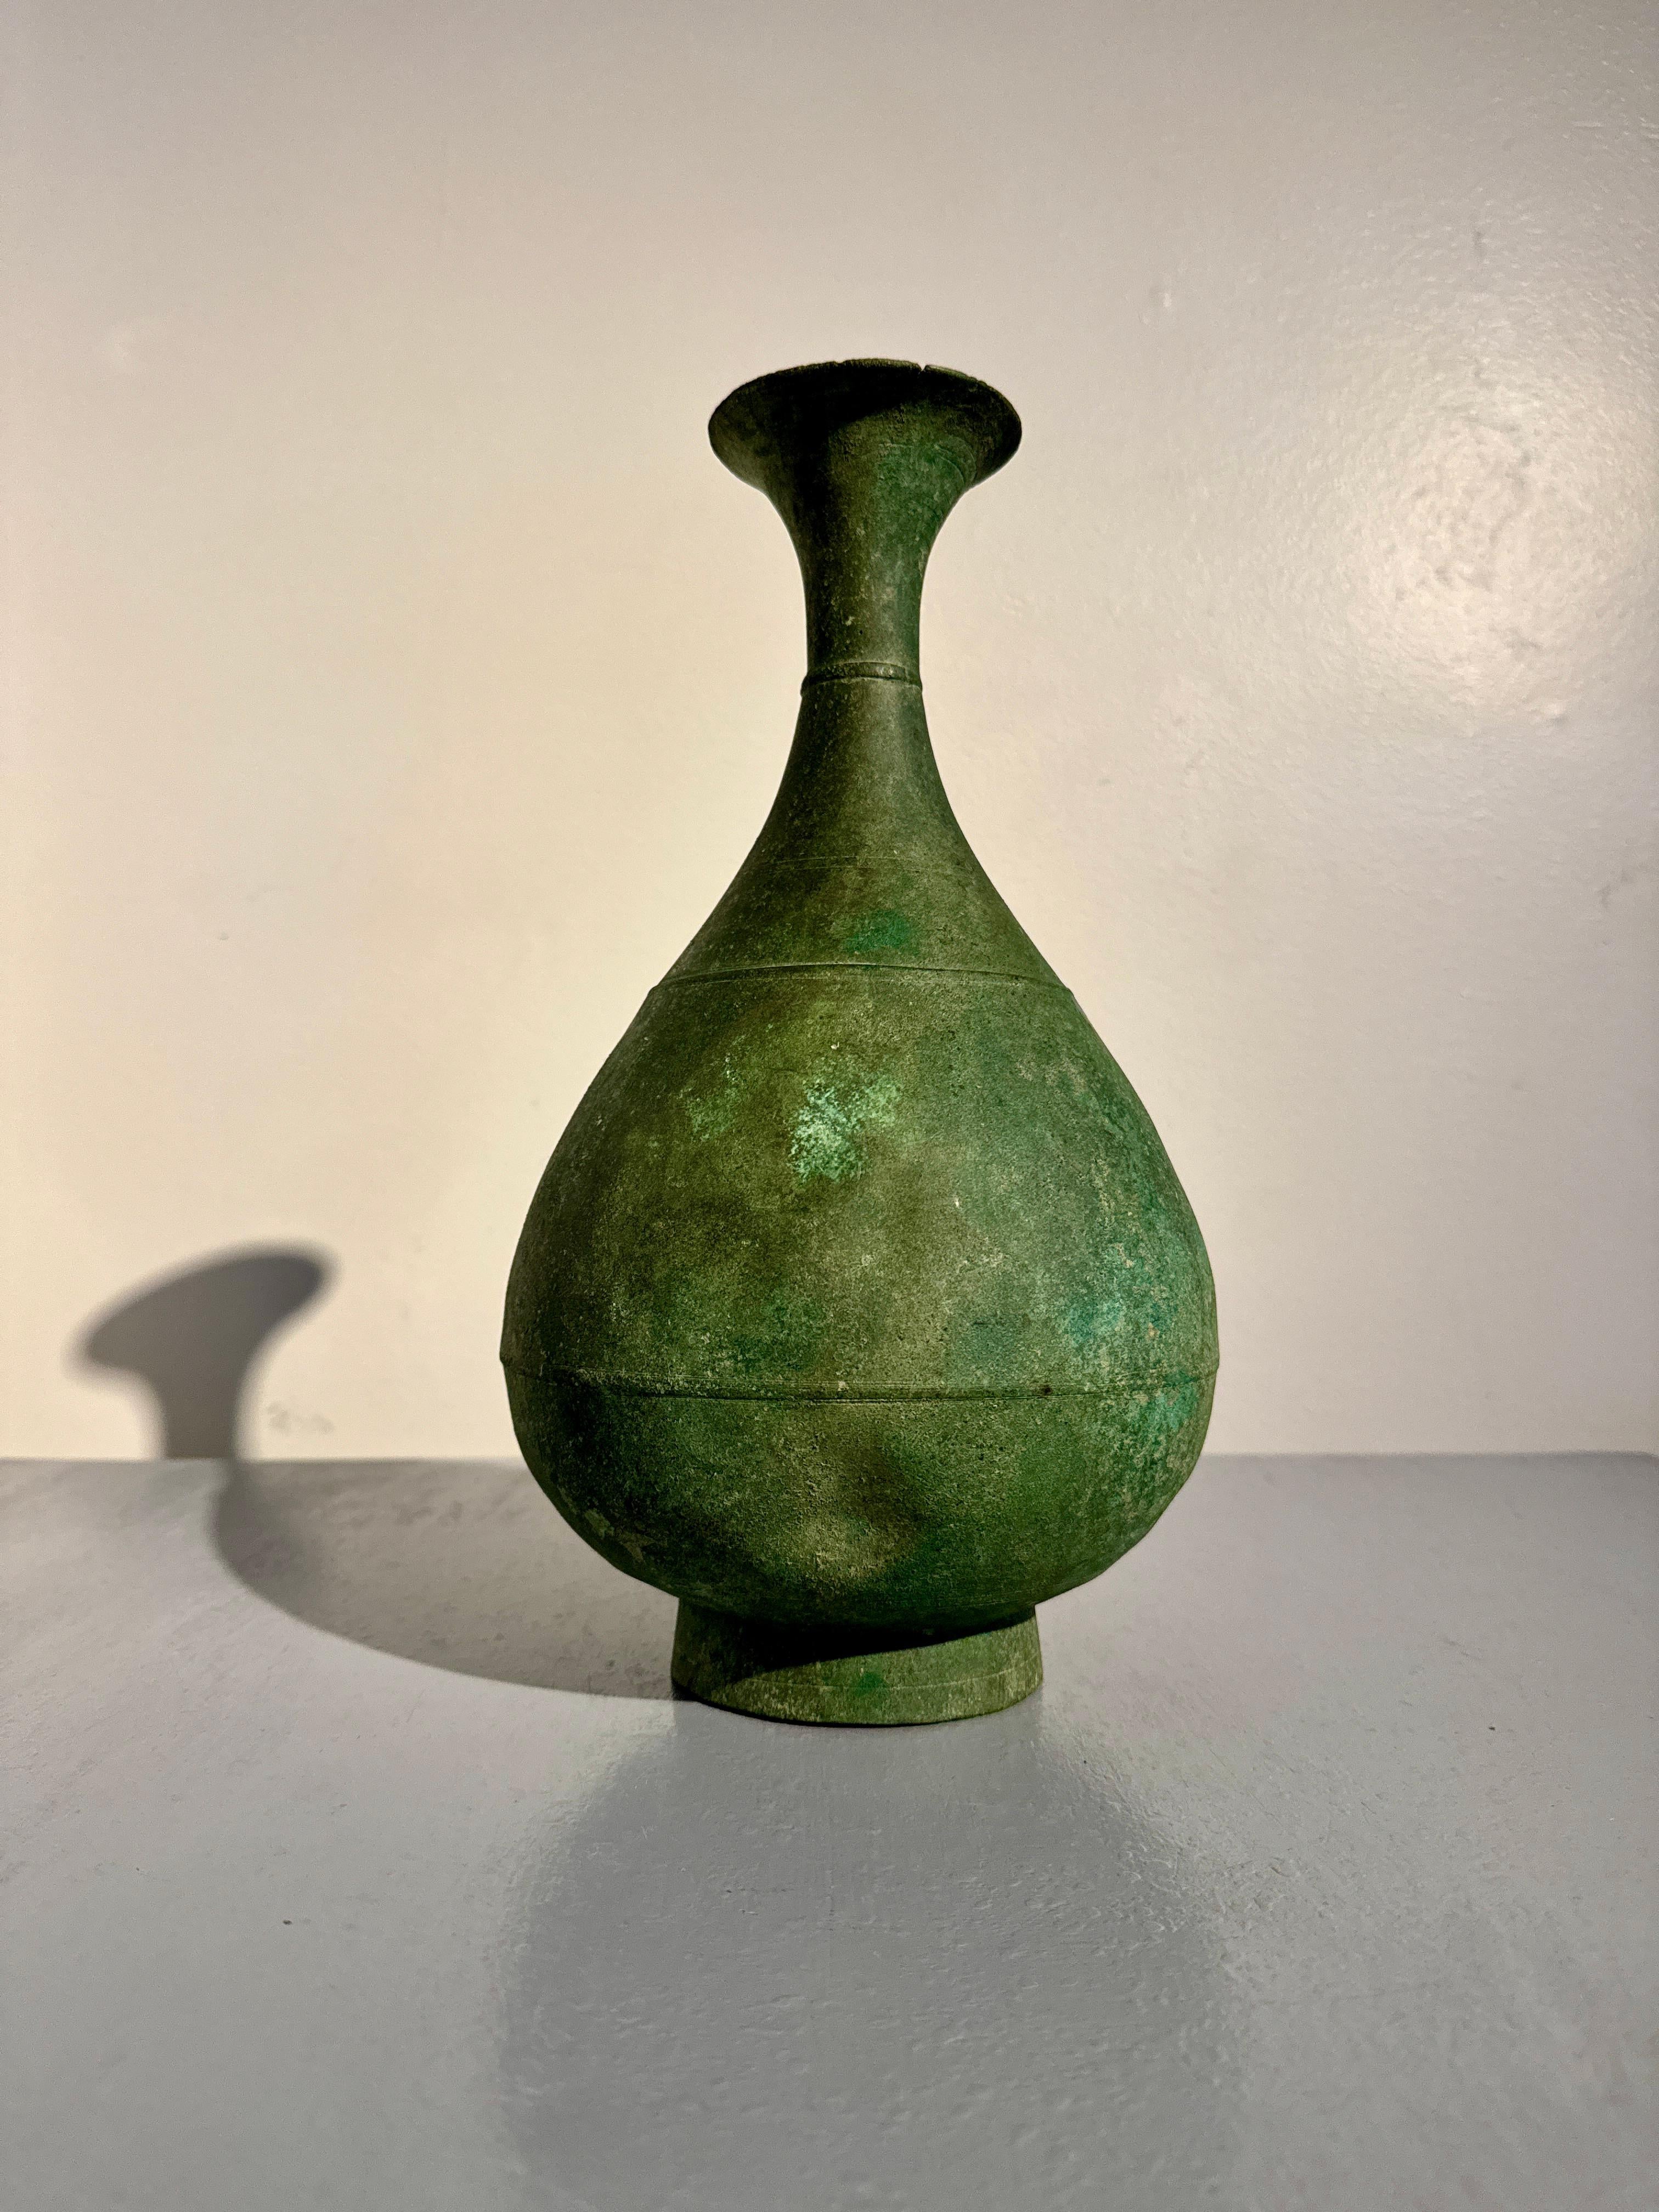 An elegant and unusually large Korean Goryeo bronze bottle vase with green patina, Goryeo Dynasty, 12th/13th century, Korea.

The graceful vase of typical bottle form, with a bulbous body set upon a short ring foot. The round body tapers upwards to